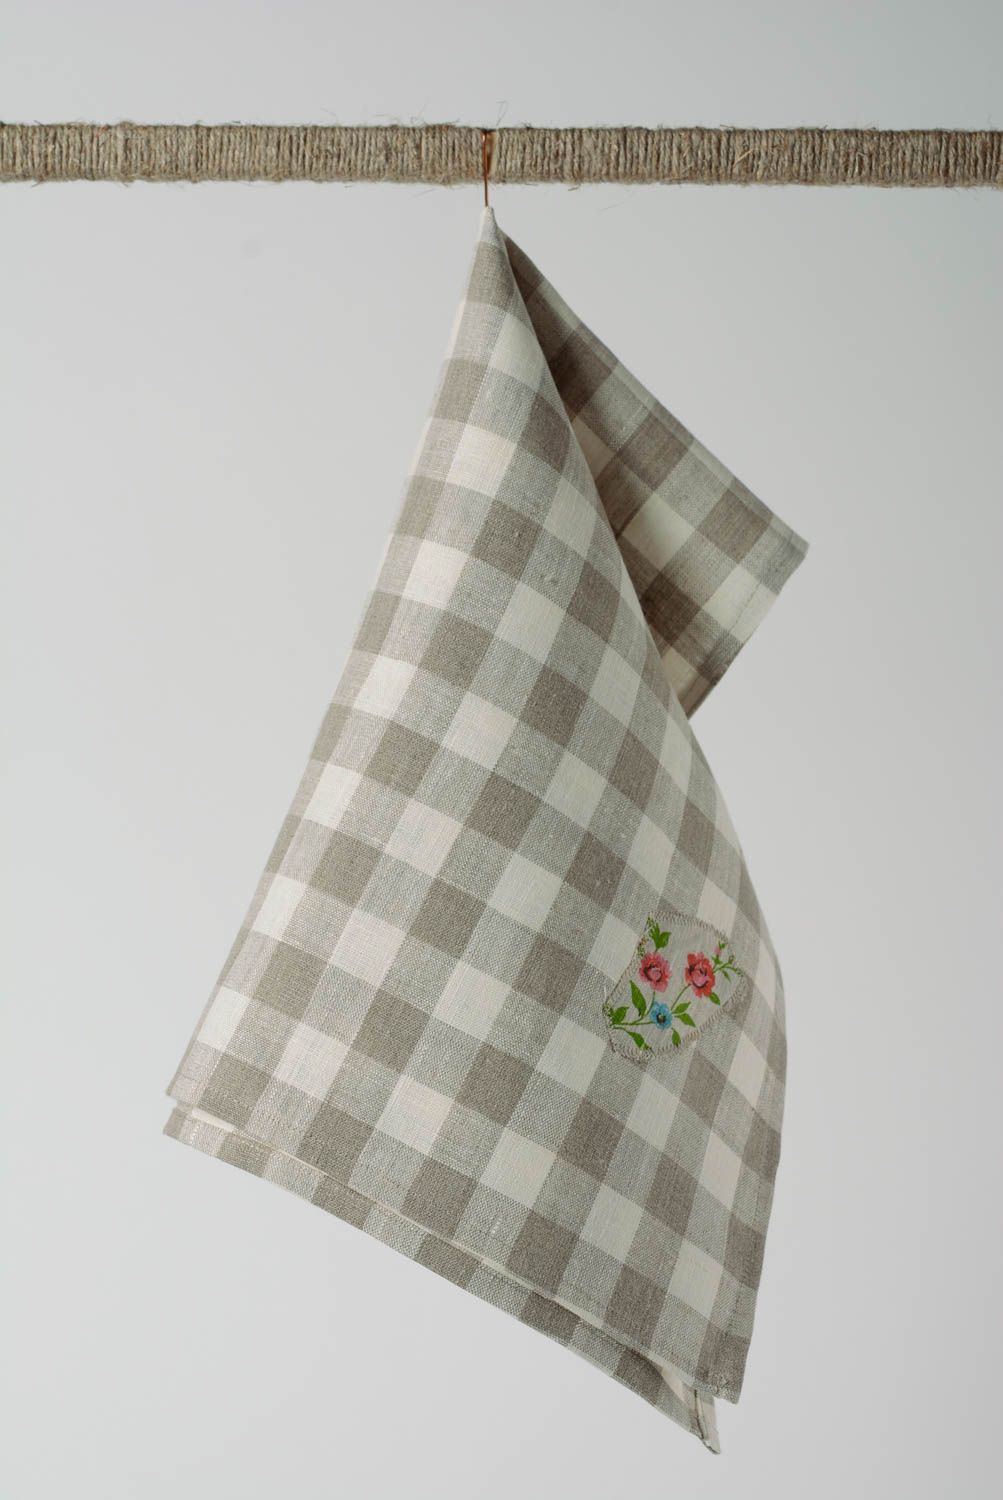 Handmade large kitchen towel sewn of checkered linen fabric with applique work photo 1